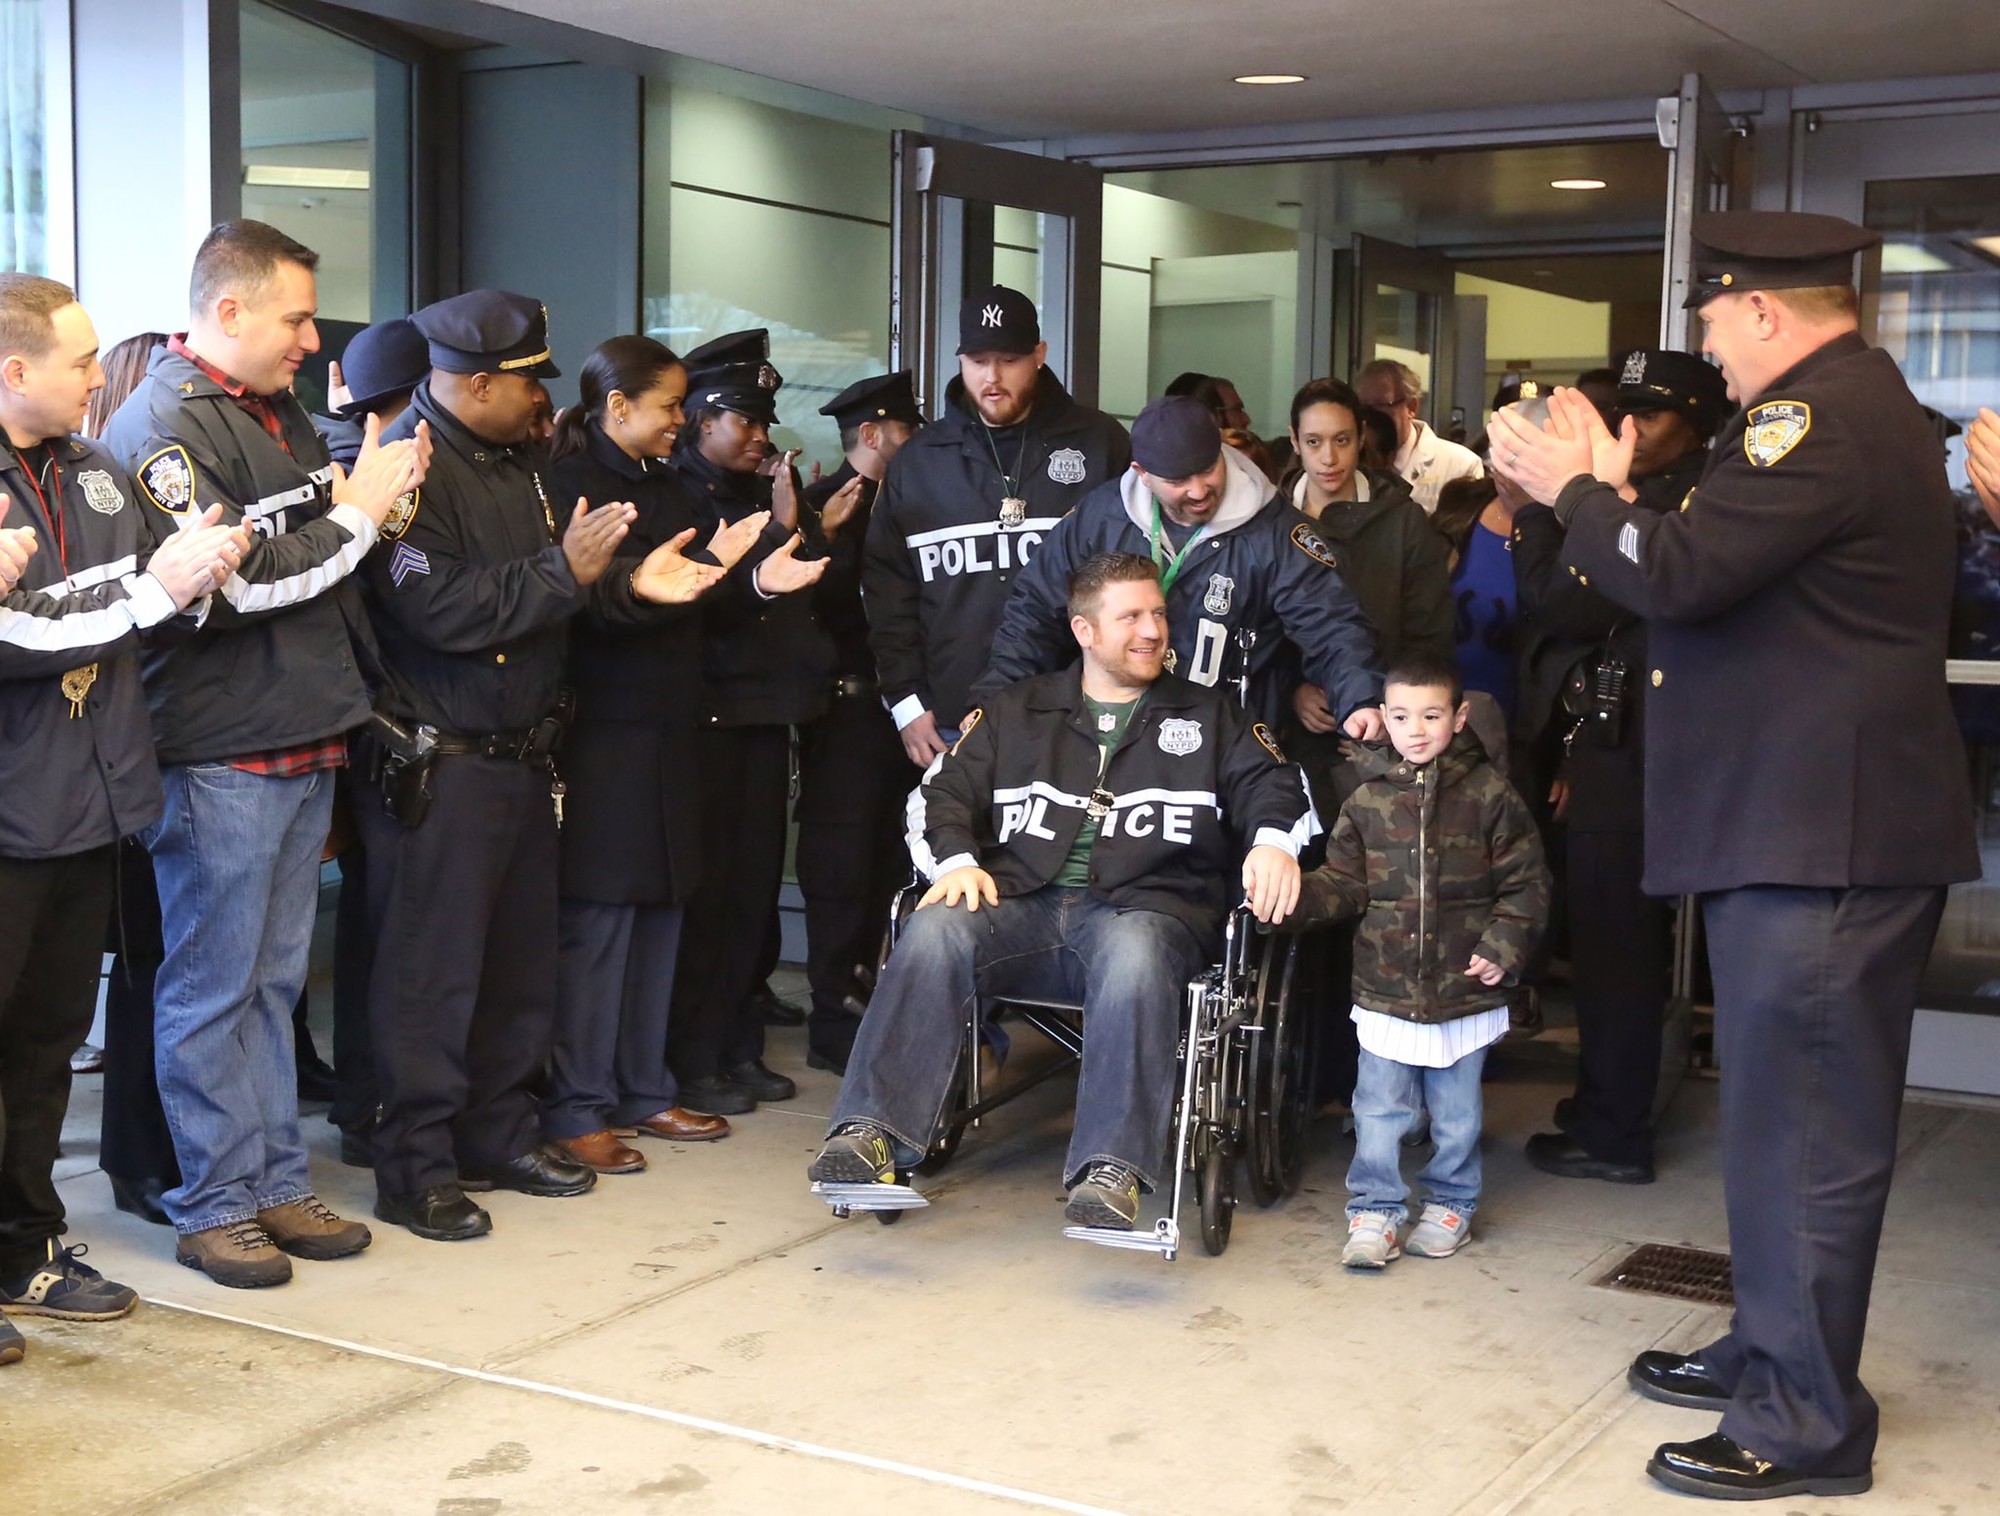 NYPD Officer Reddin, left the hospital on Tuesday to cheers to continue recovering after being shot in Brooklyn on Sunday, Feb. 21.